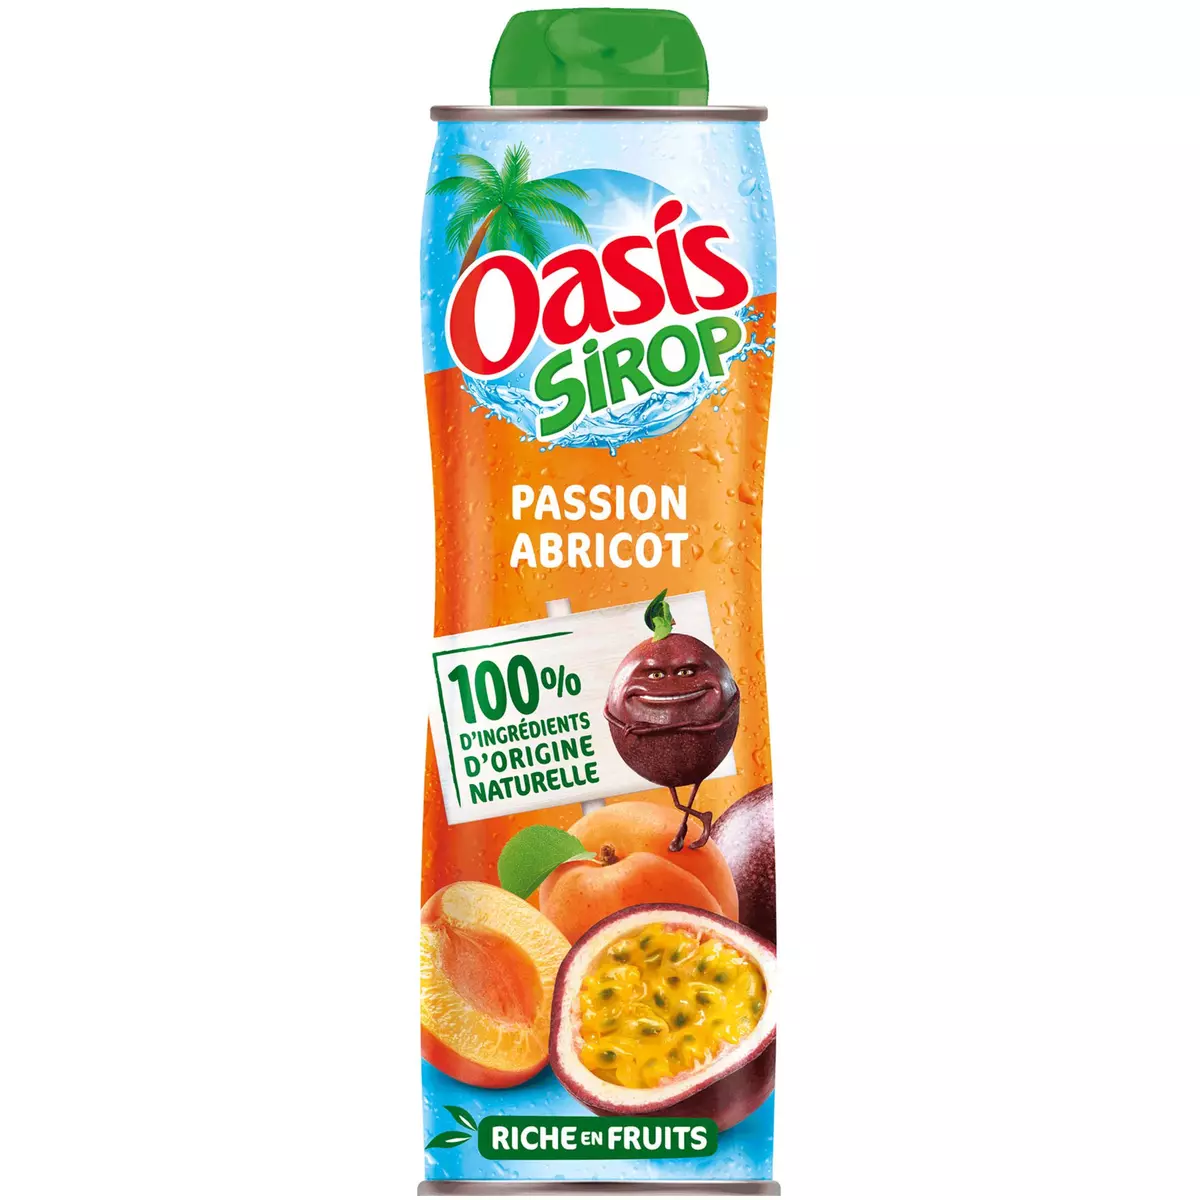 OASIS Sirop goût passion abricot 60cl